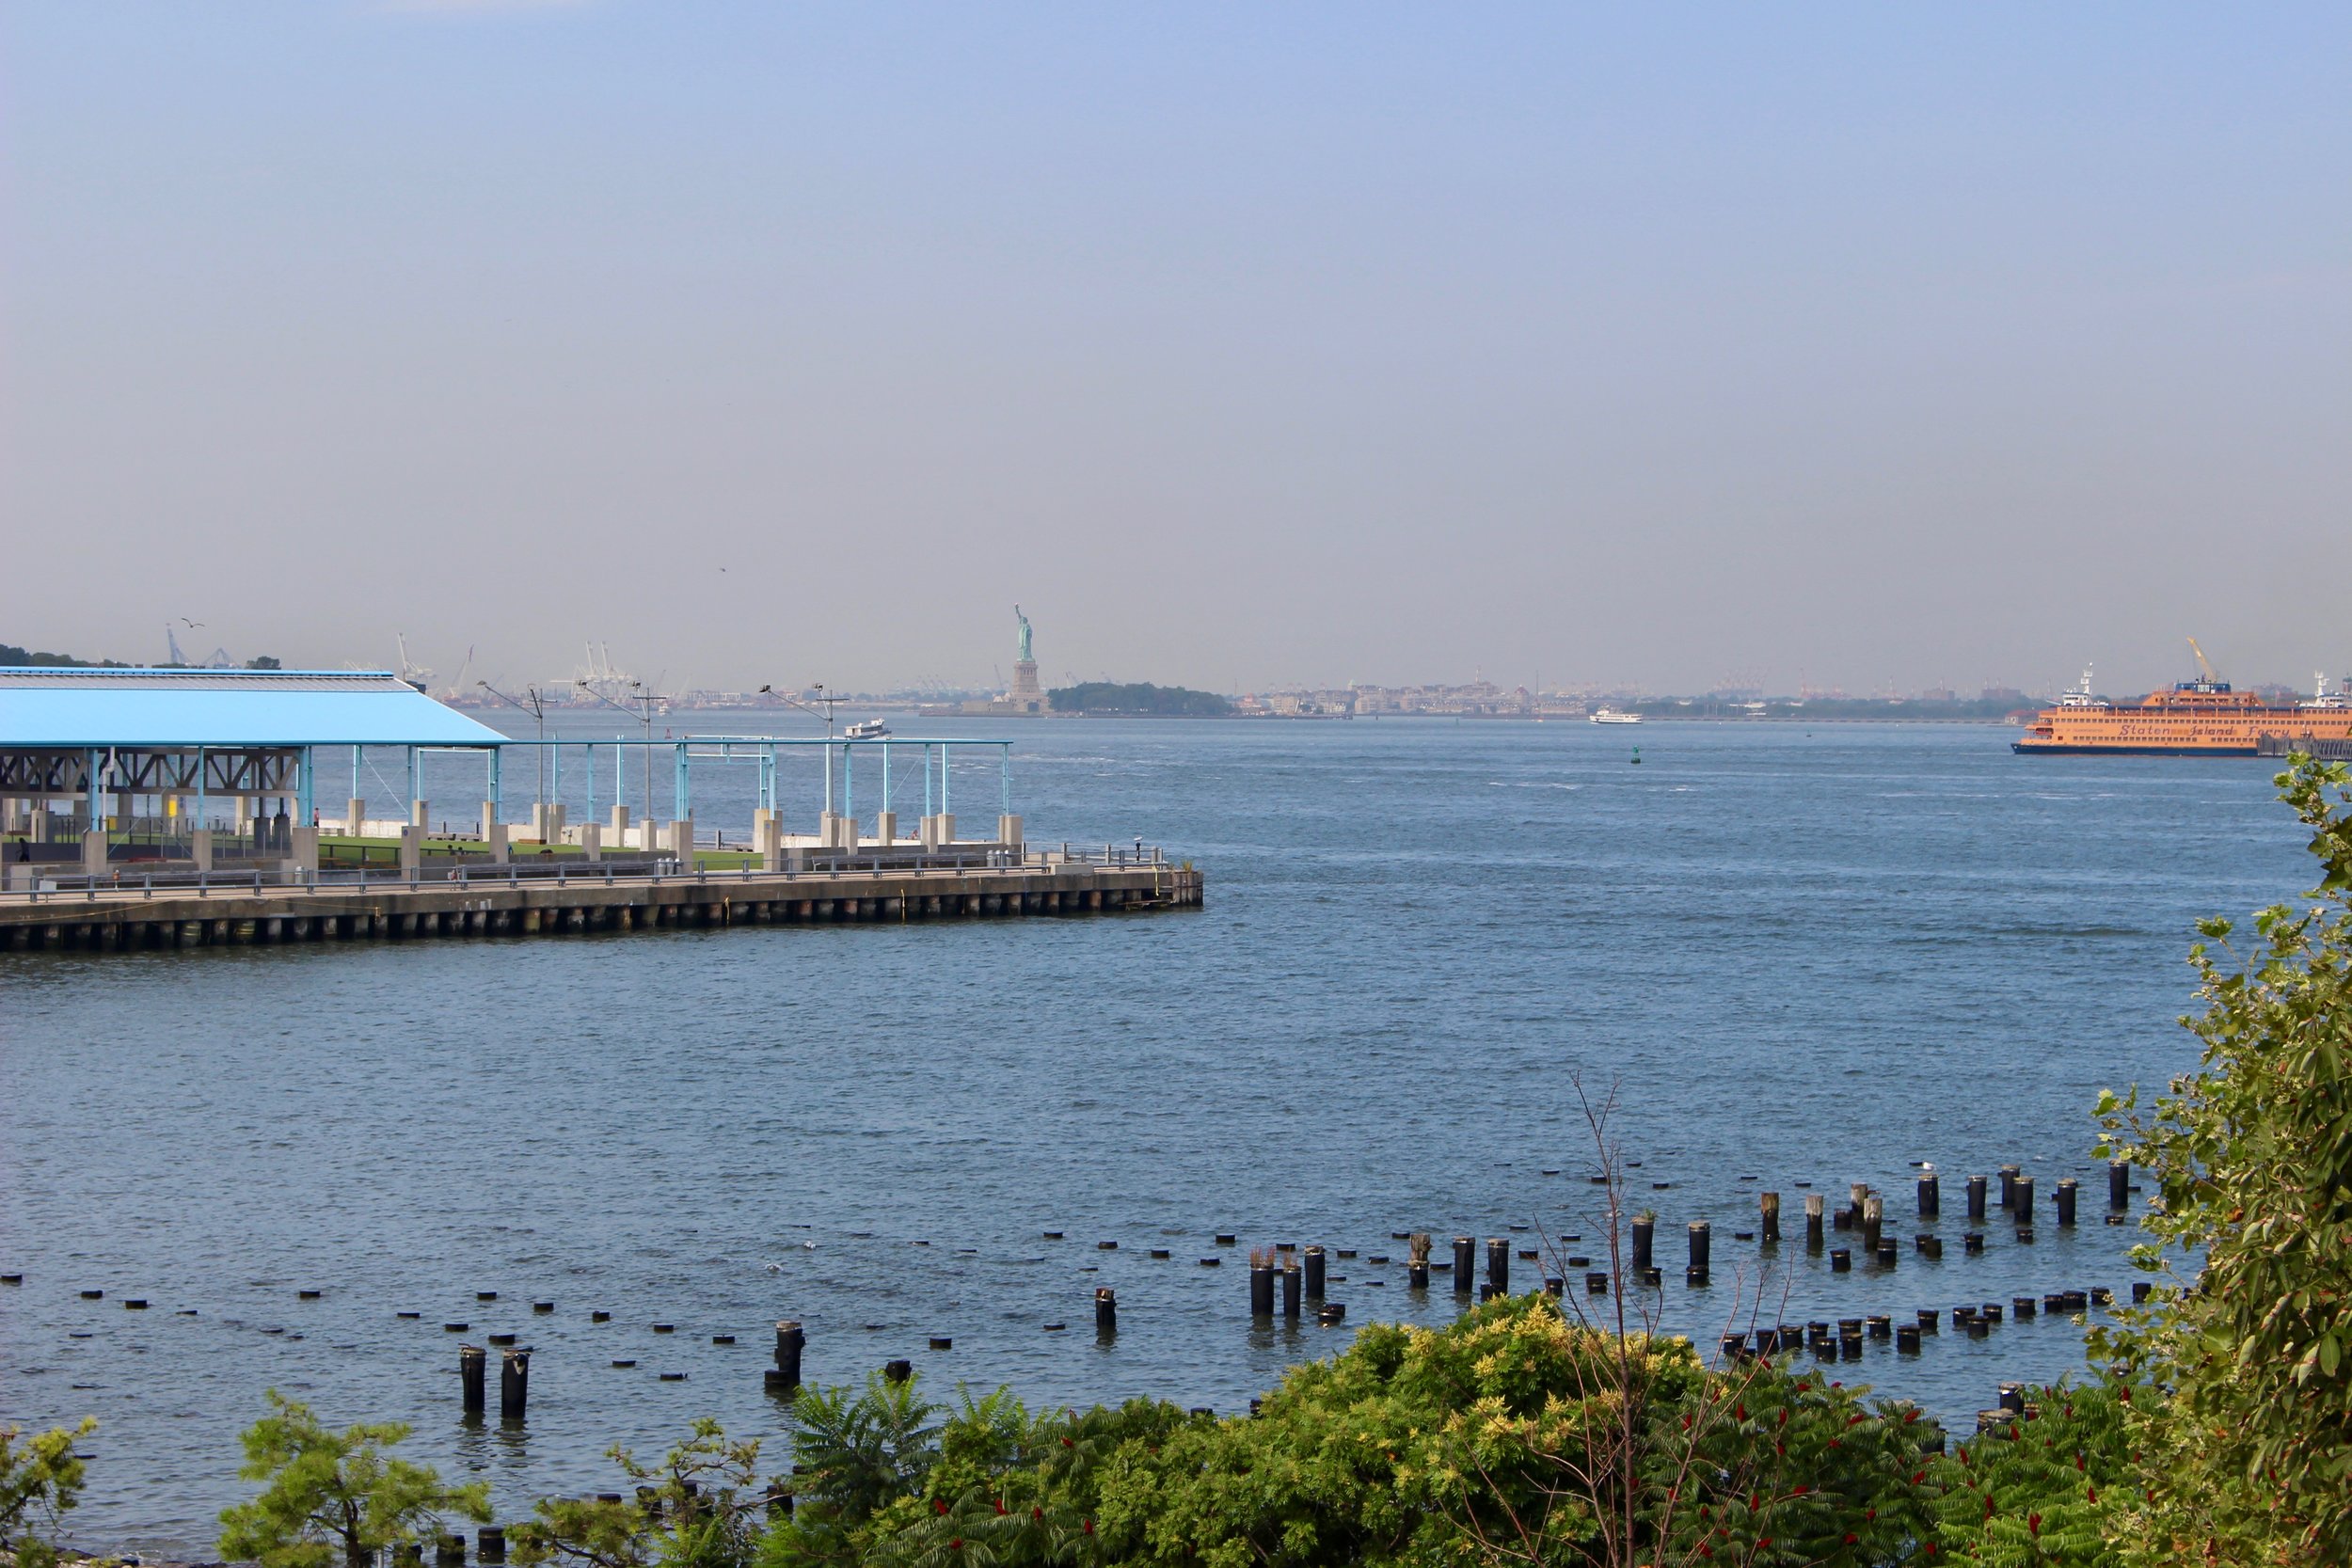  Reaching the end of the footbridge and stepping out onto the path, here is the view.&nbsp; Note the Staten Island Ferry making its way into the Harbor and the Statue of Liberty.&nbsp;&nbsp;It is always breath taking, no matter how many times you app